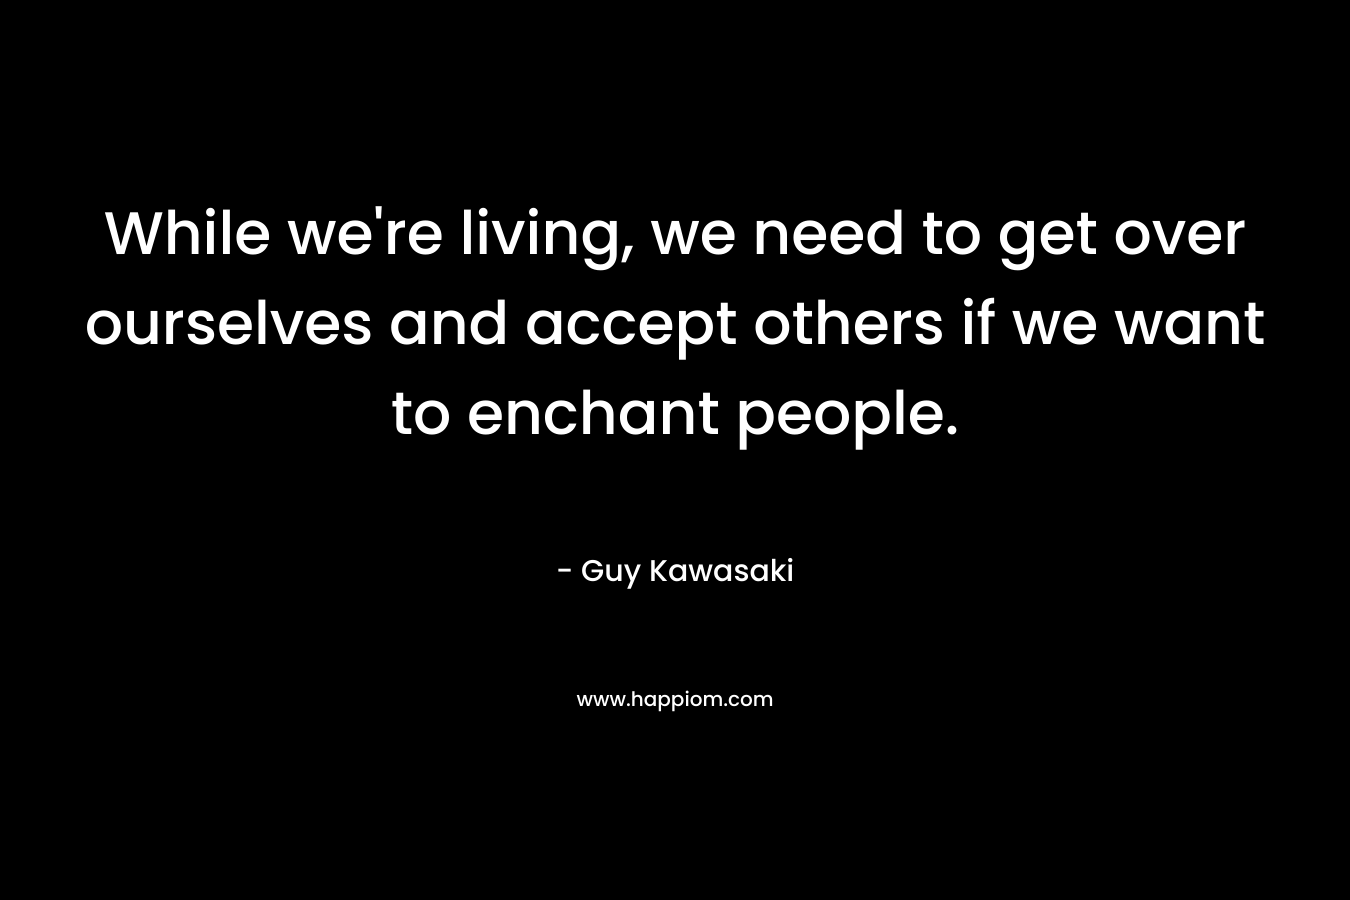 While we're living, we need to get over ourselves and accept others if we want to enchant people.